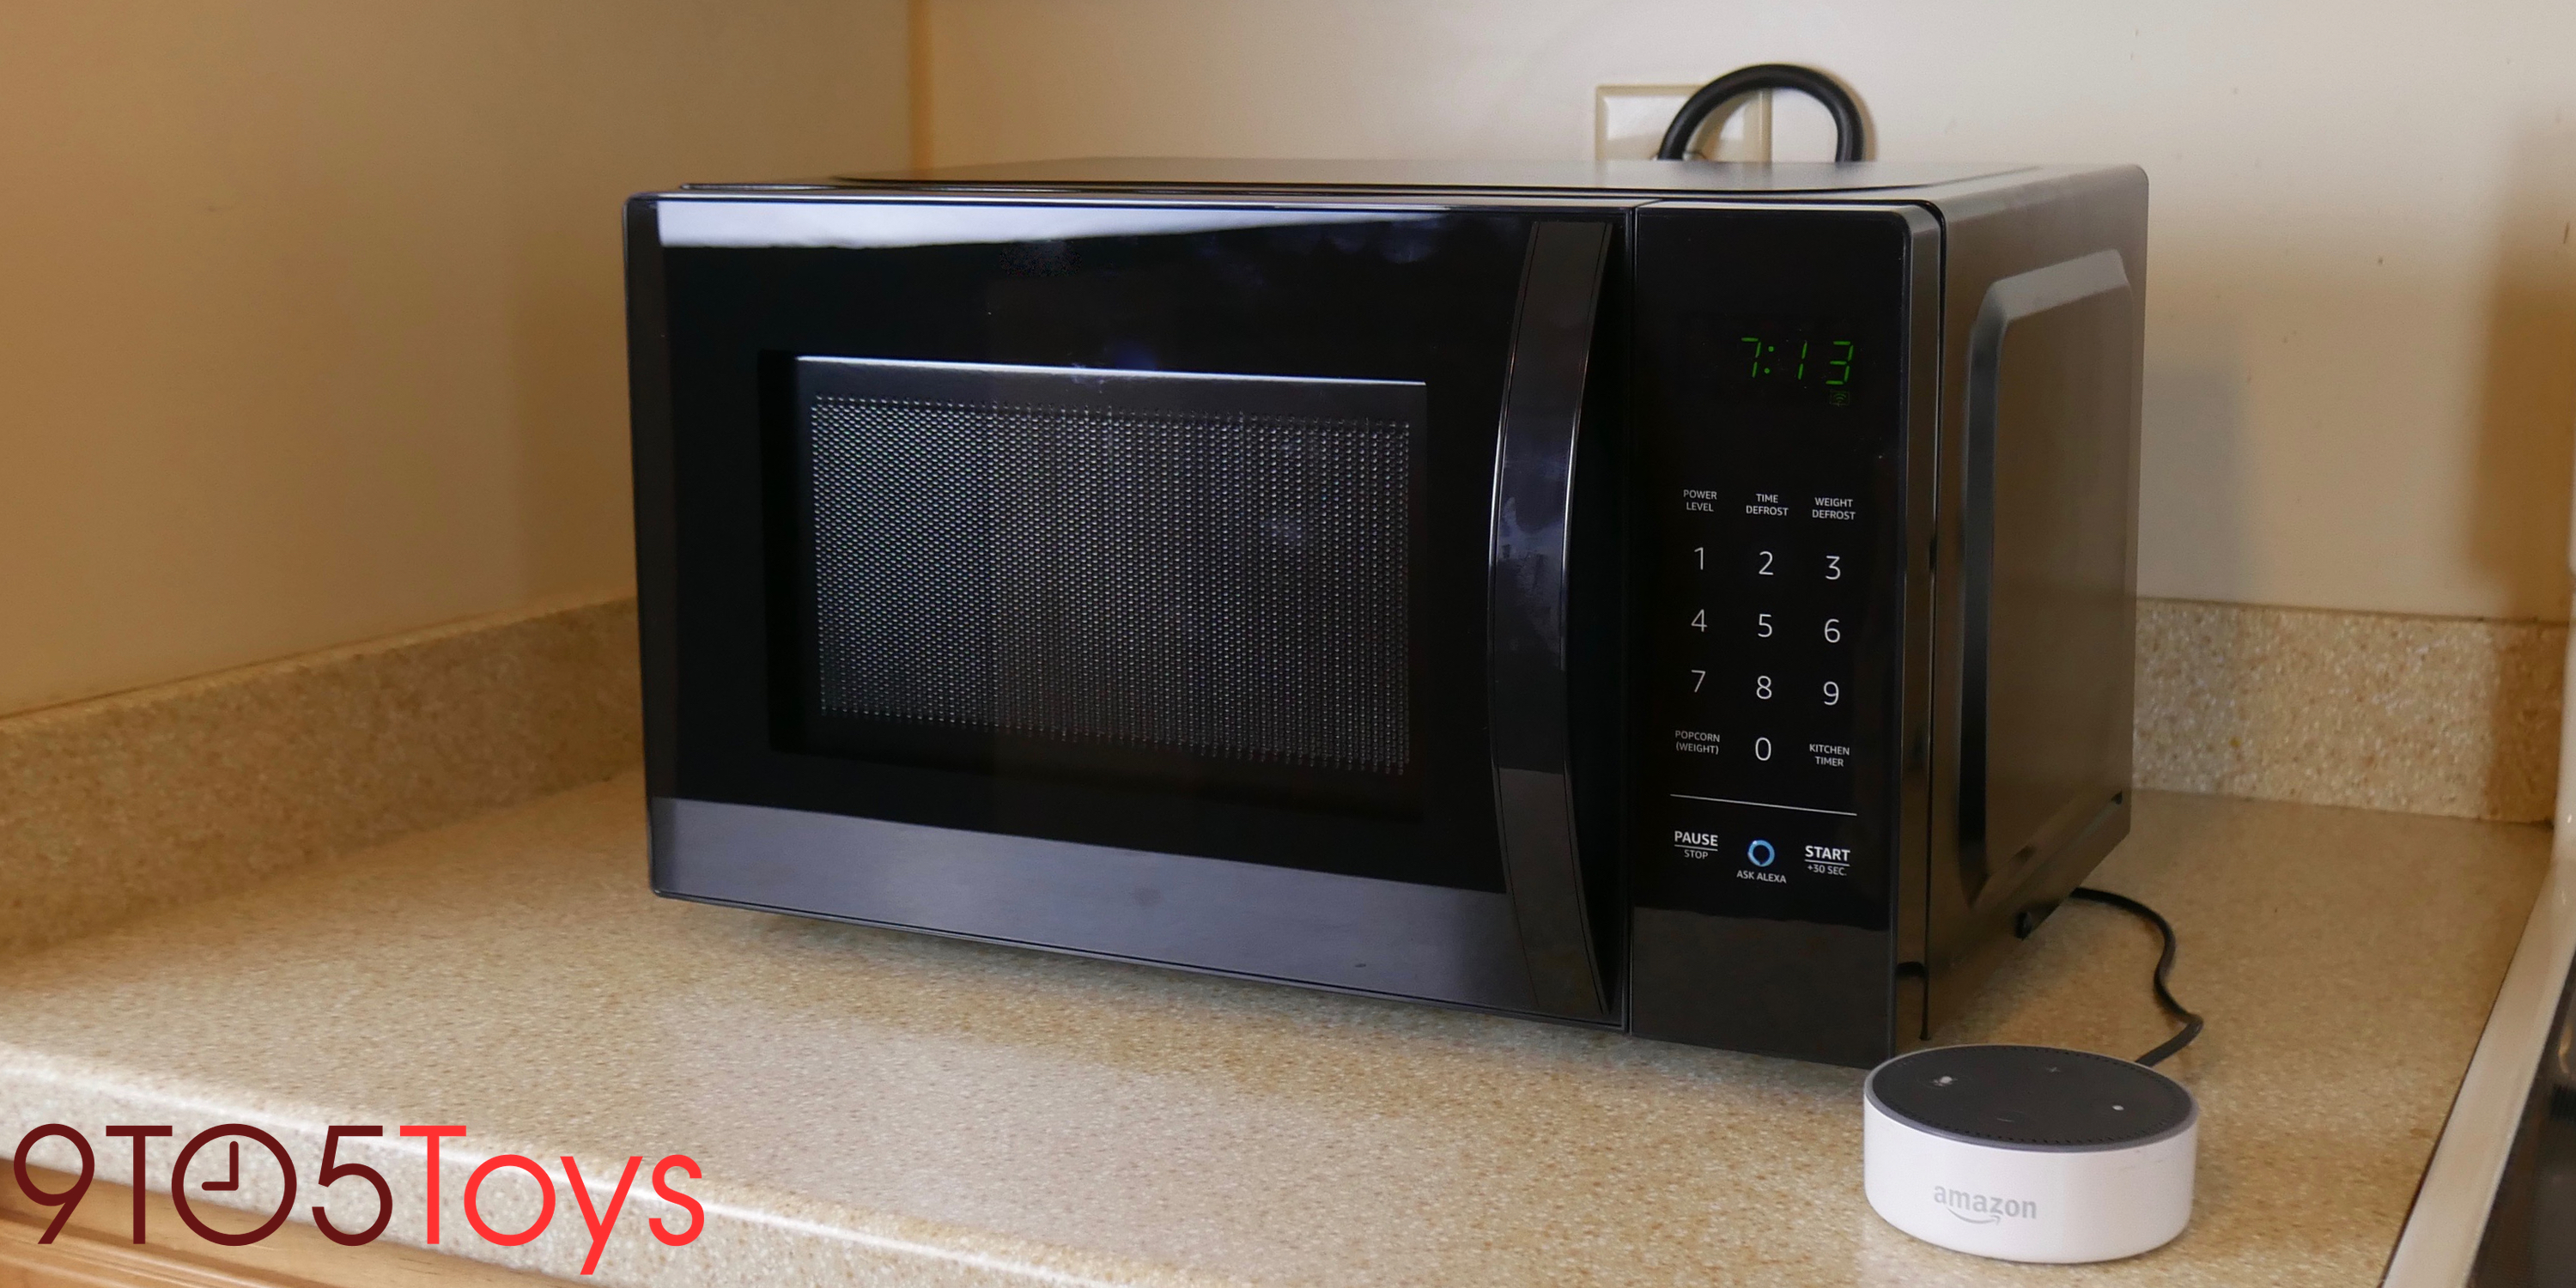 Amazonbasics Microwave Review A Look At The Newest Alexa Device